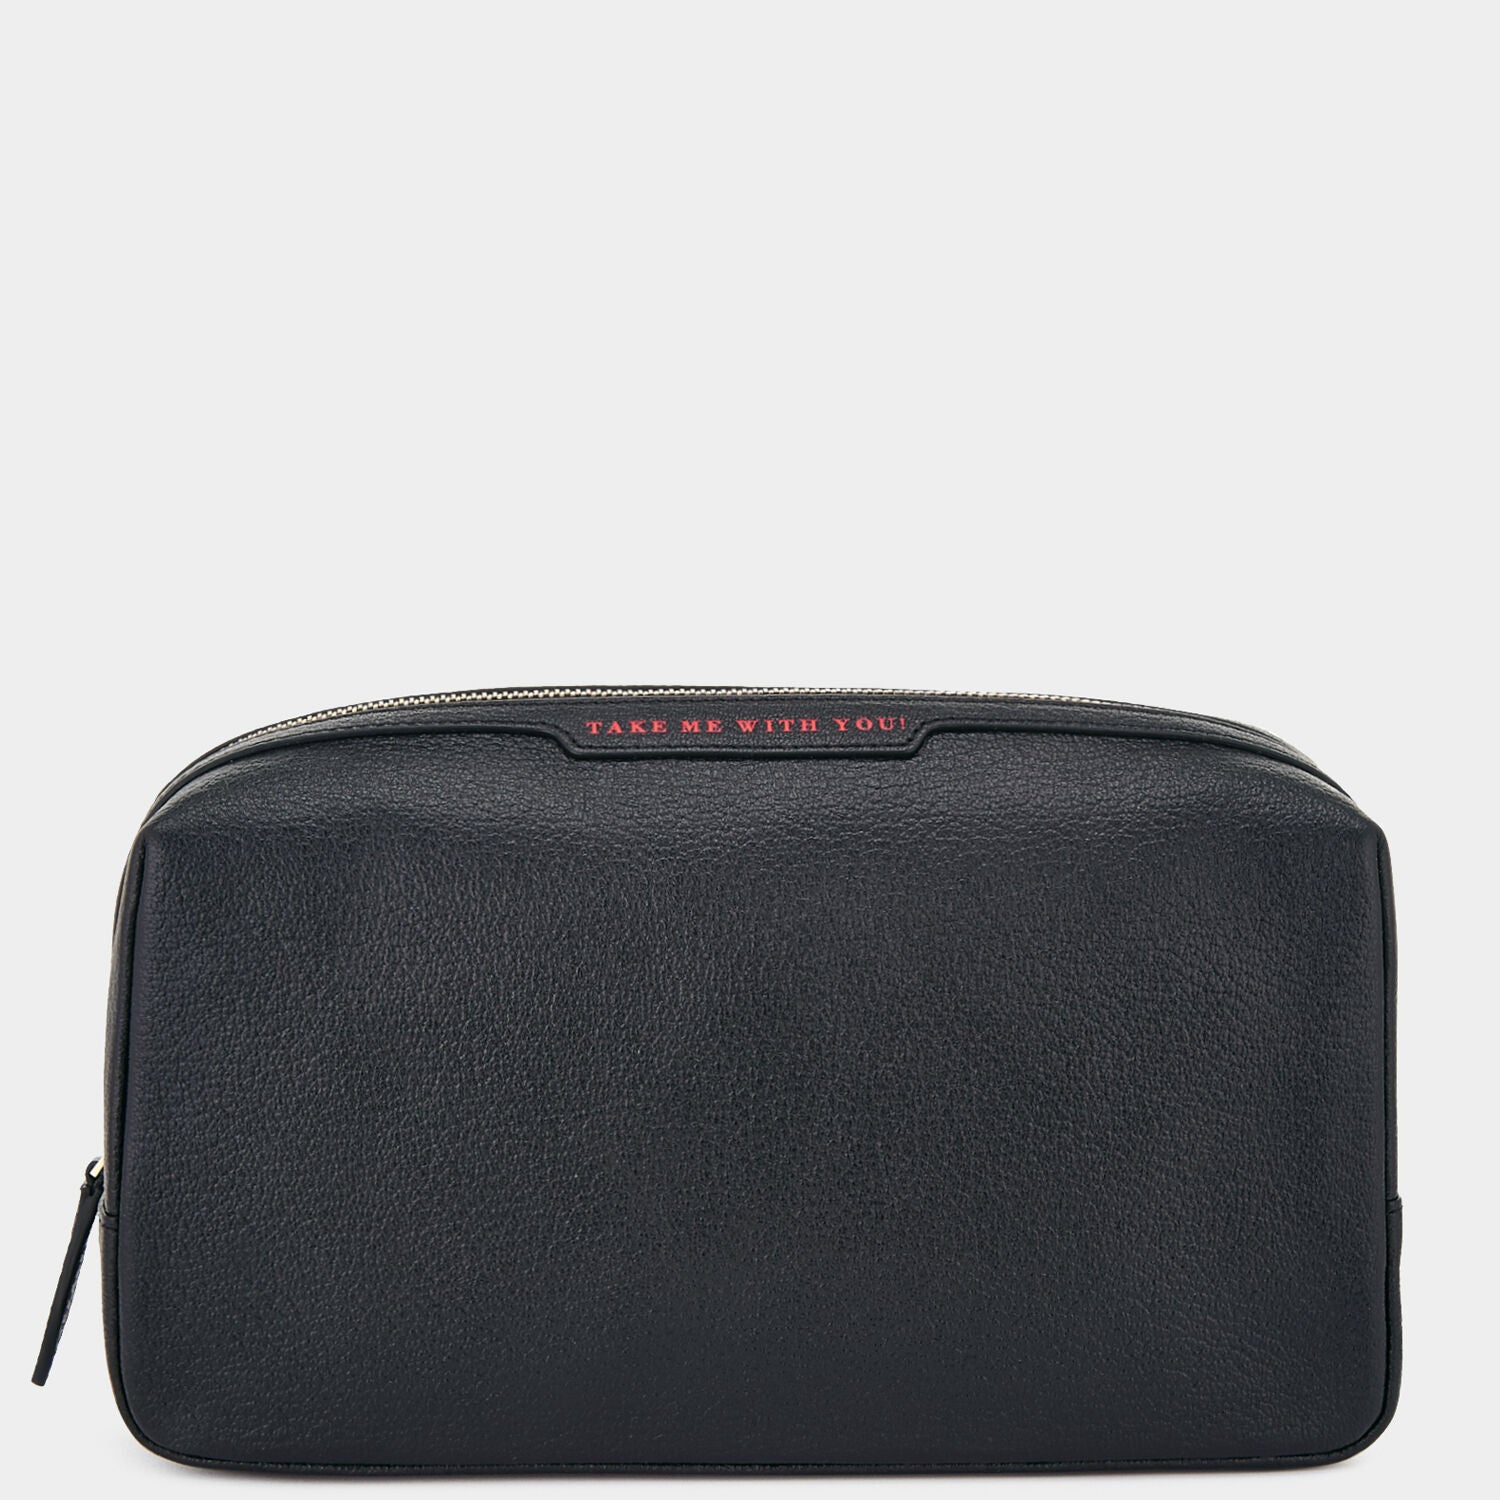 Anya Hindmarch Bespoke Large Pouch